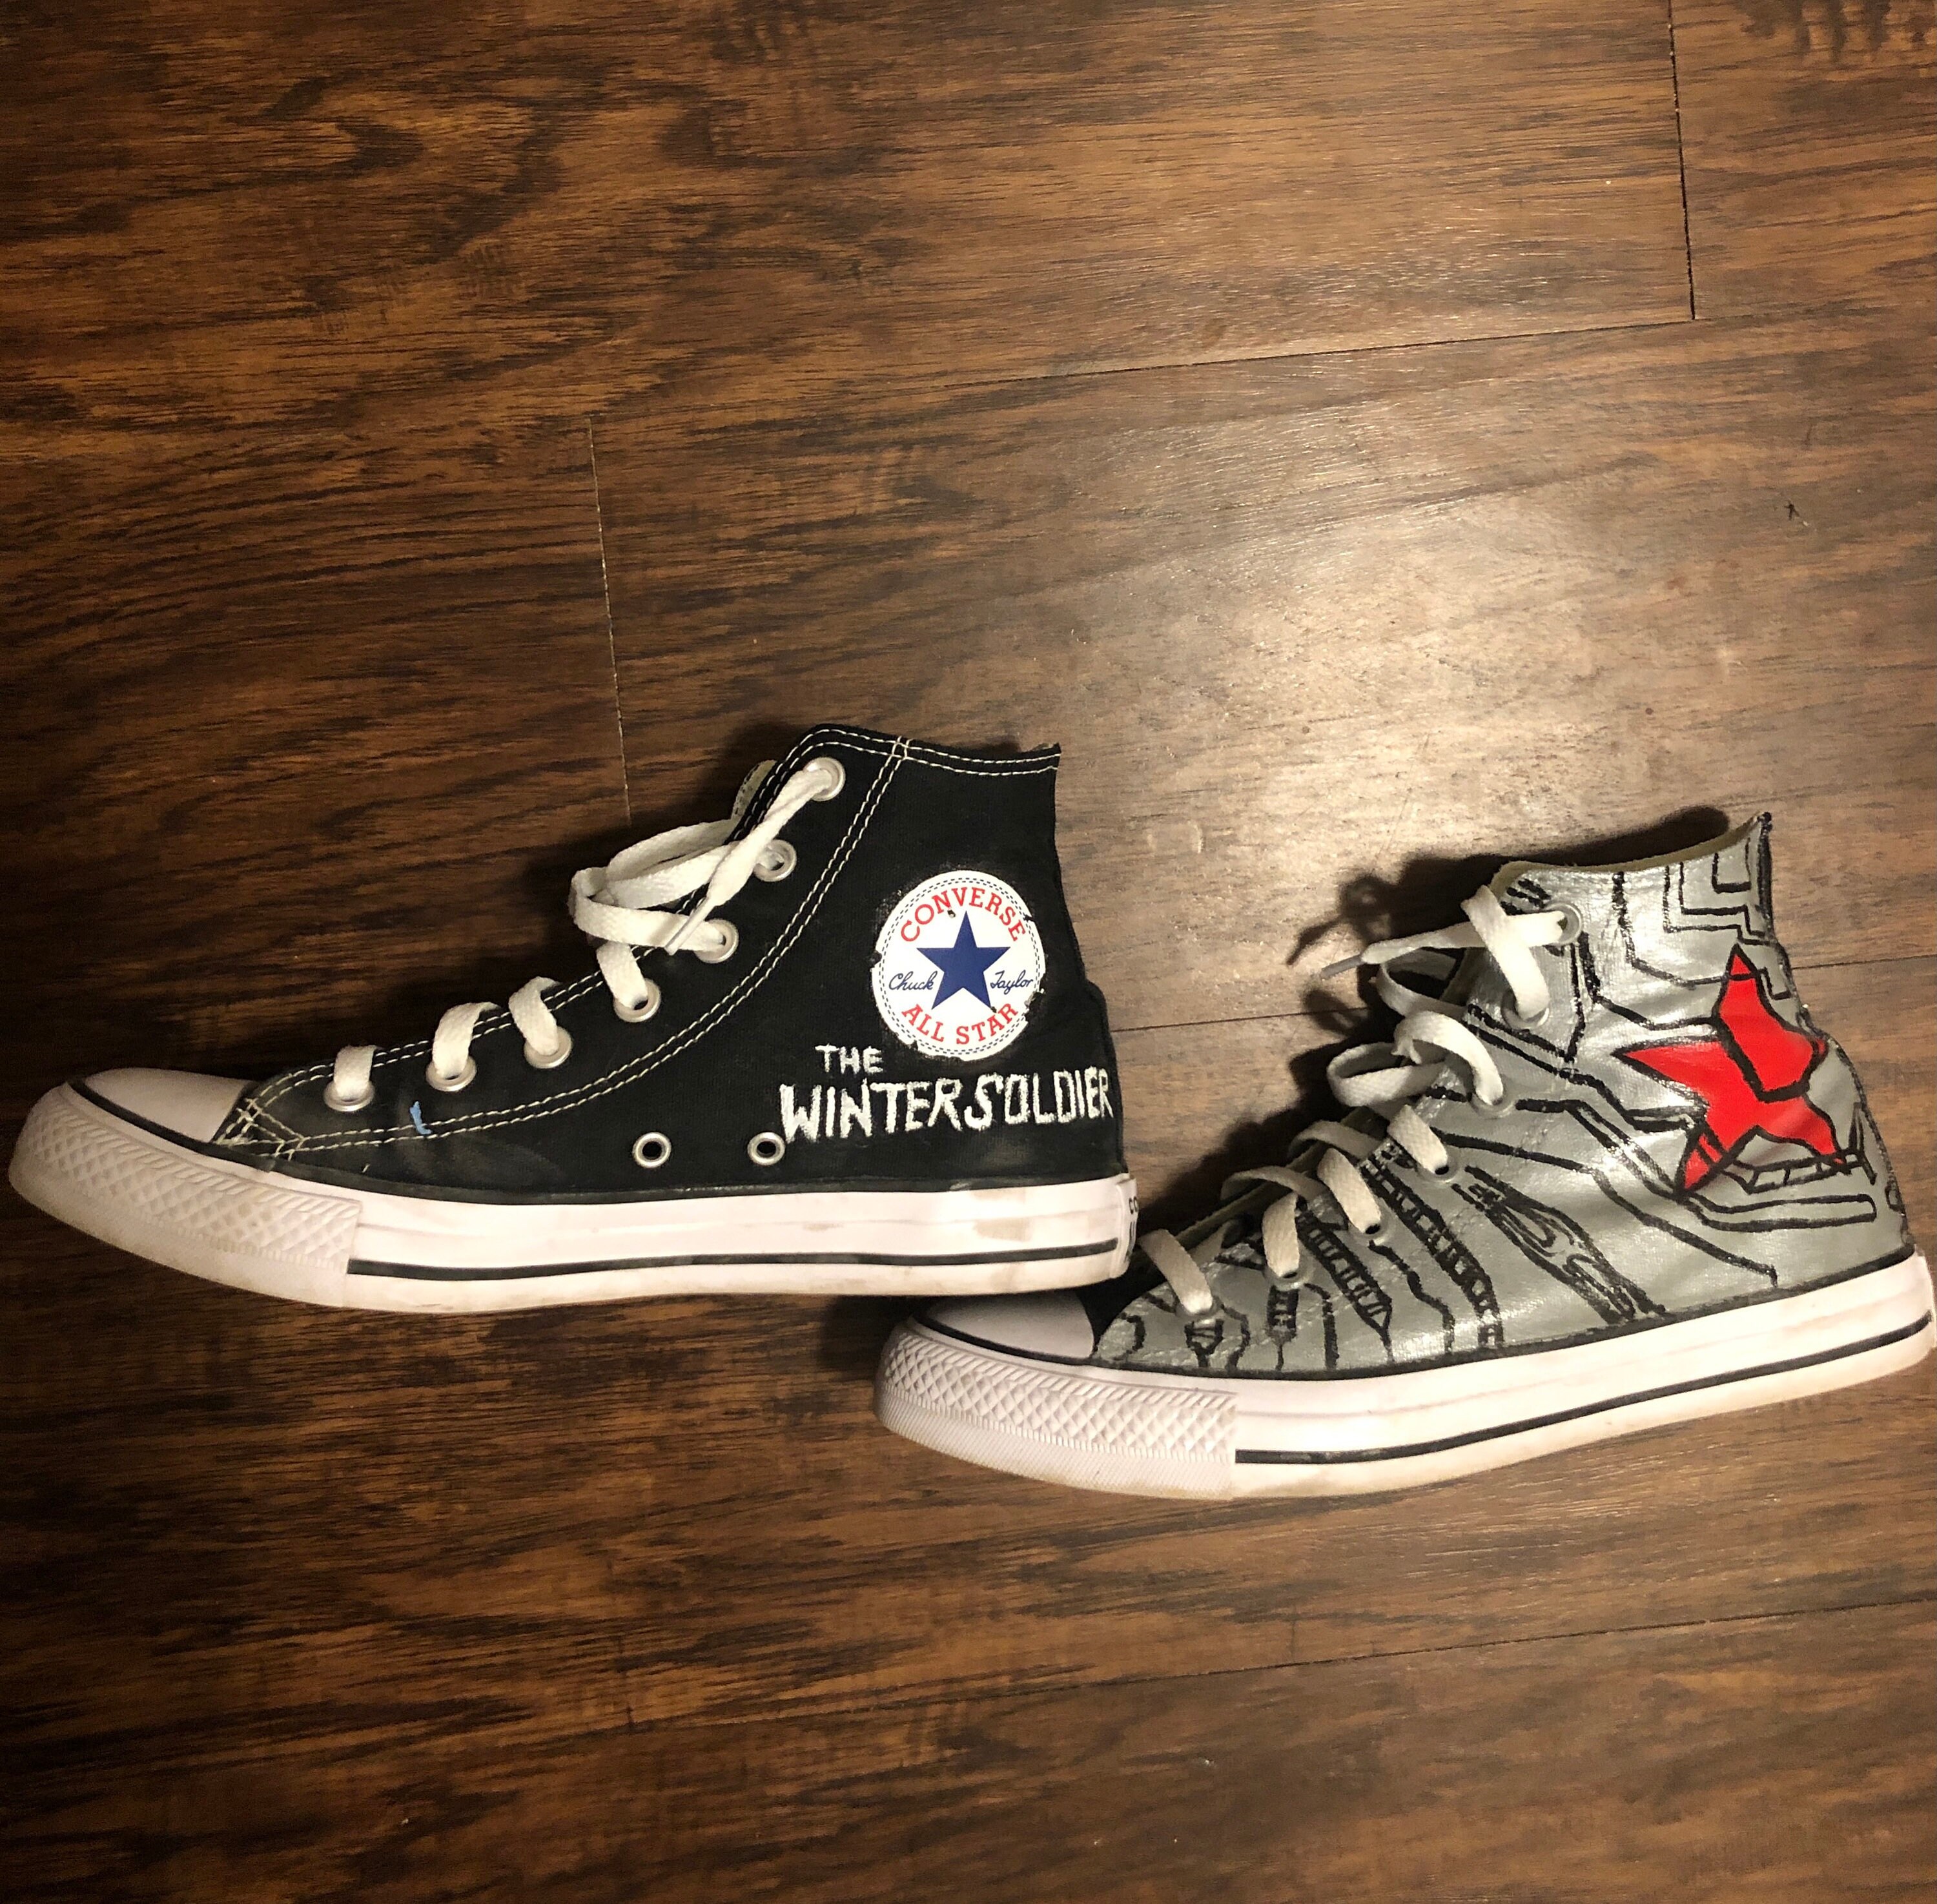 Hand Painted Winter Soldier Converse | Etsy